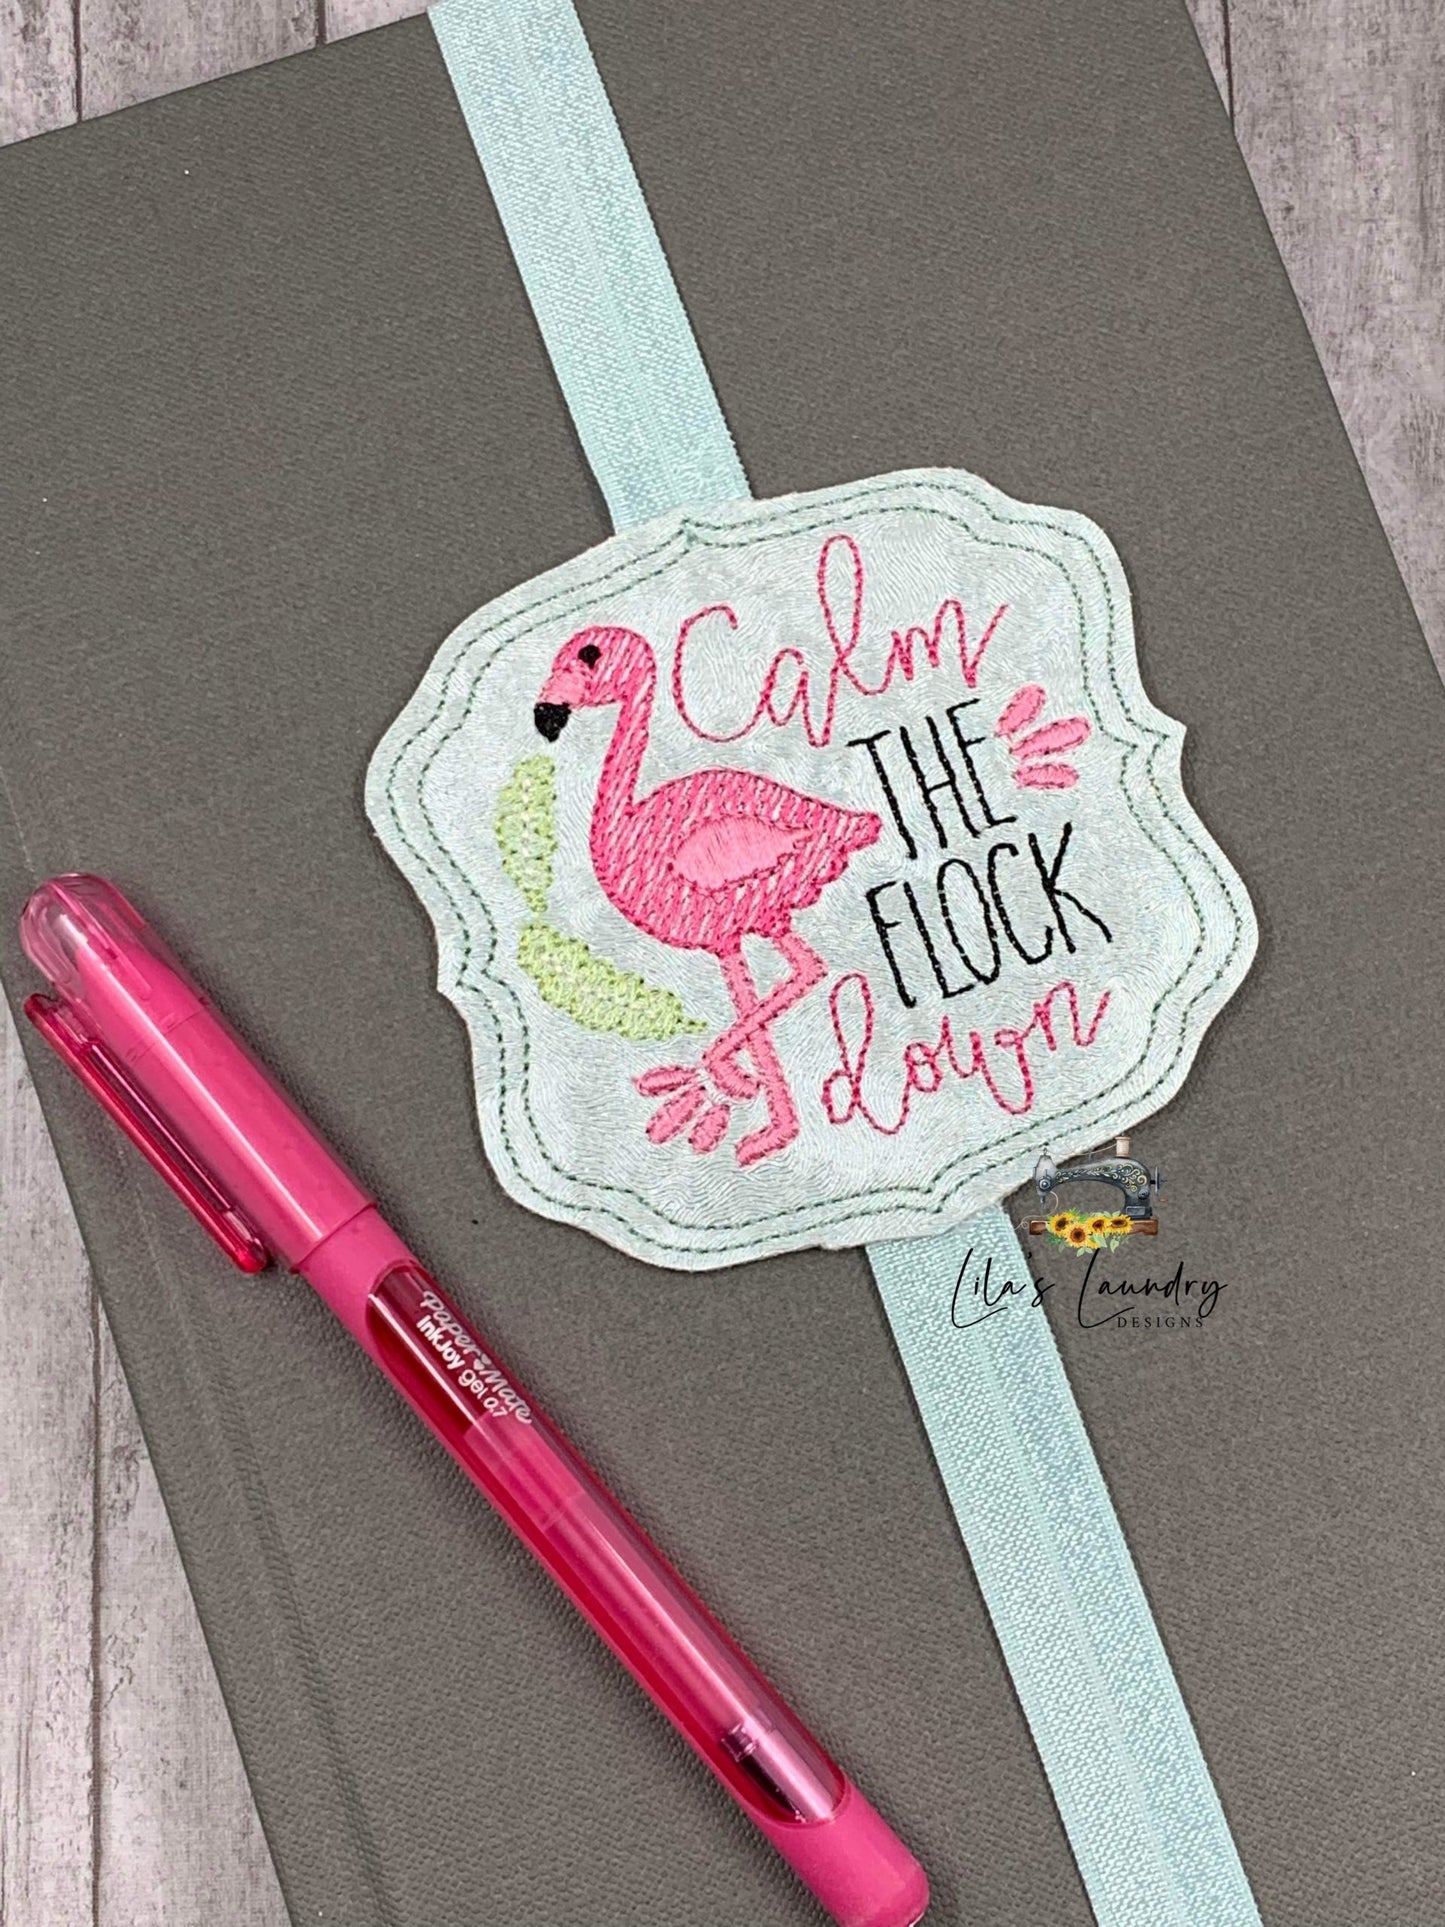 Calm the Flock Down Book Band - Embroidery Design, Digital File